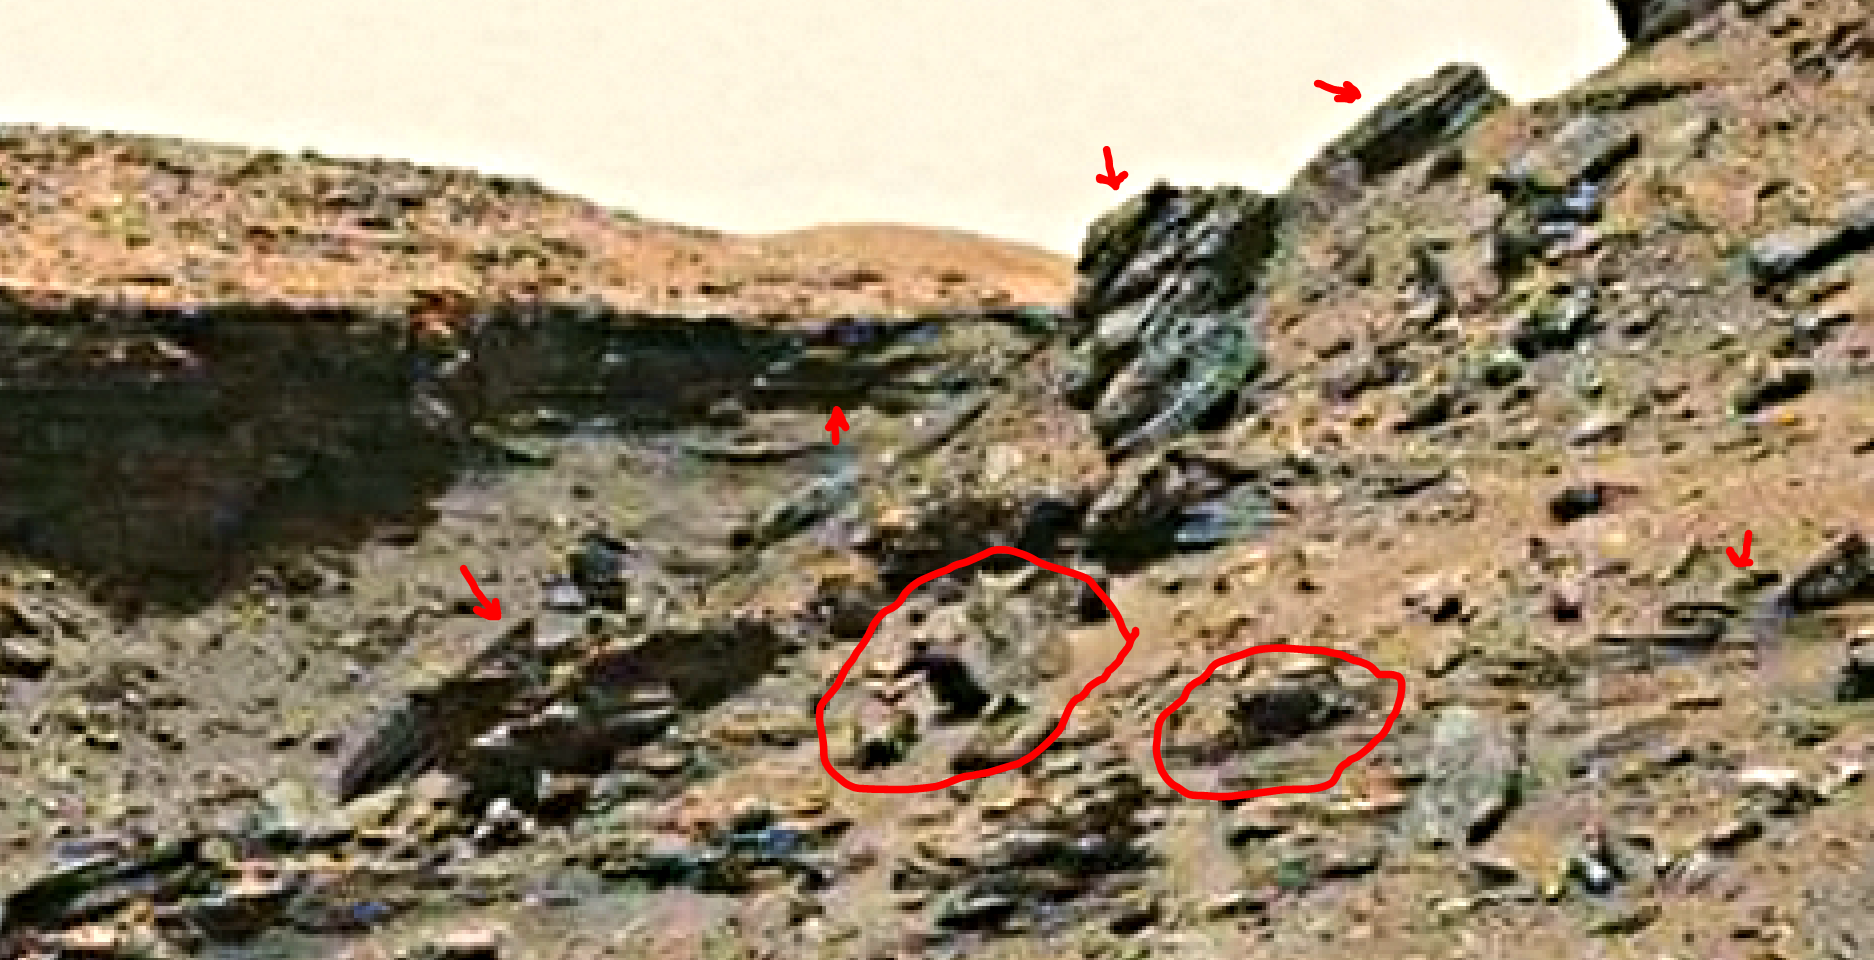 mars sol 1432 b&w anomaly artifacts 14 was life on mars